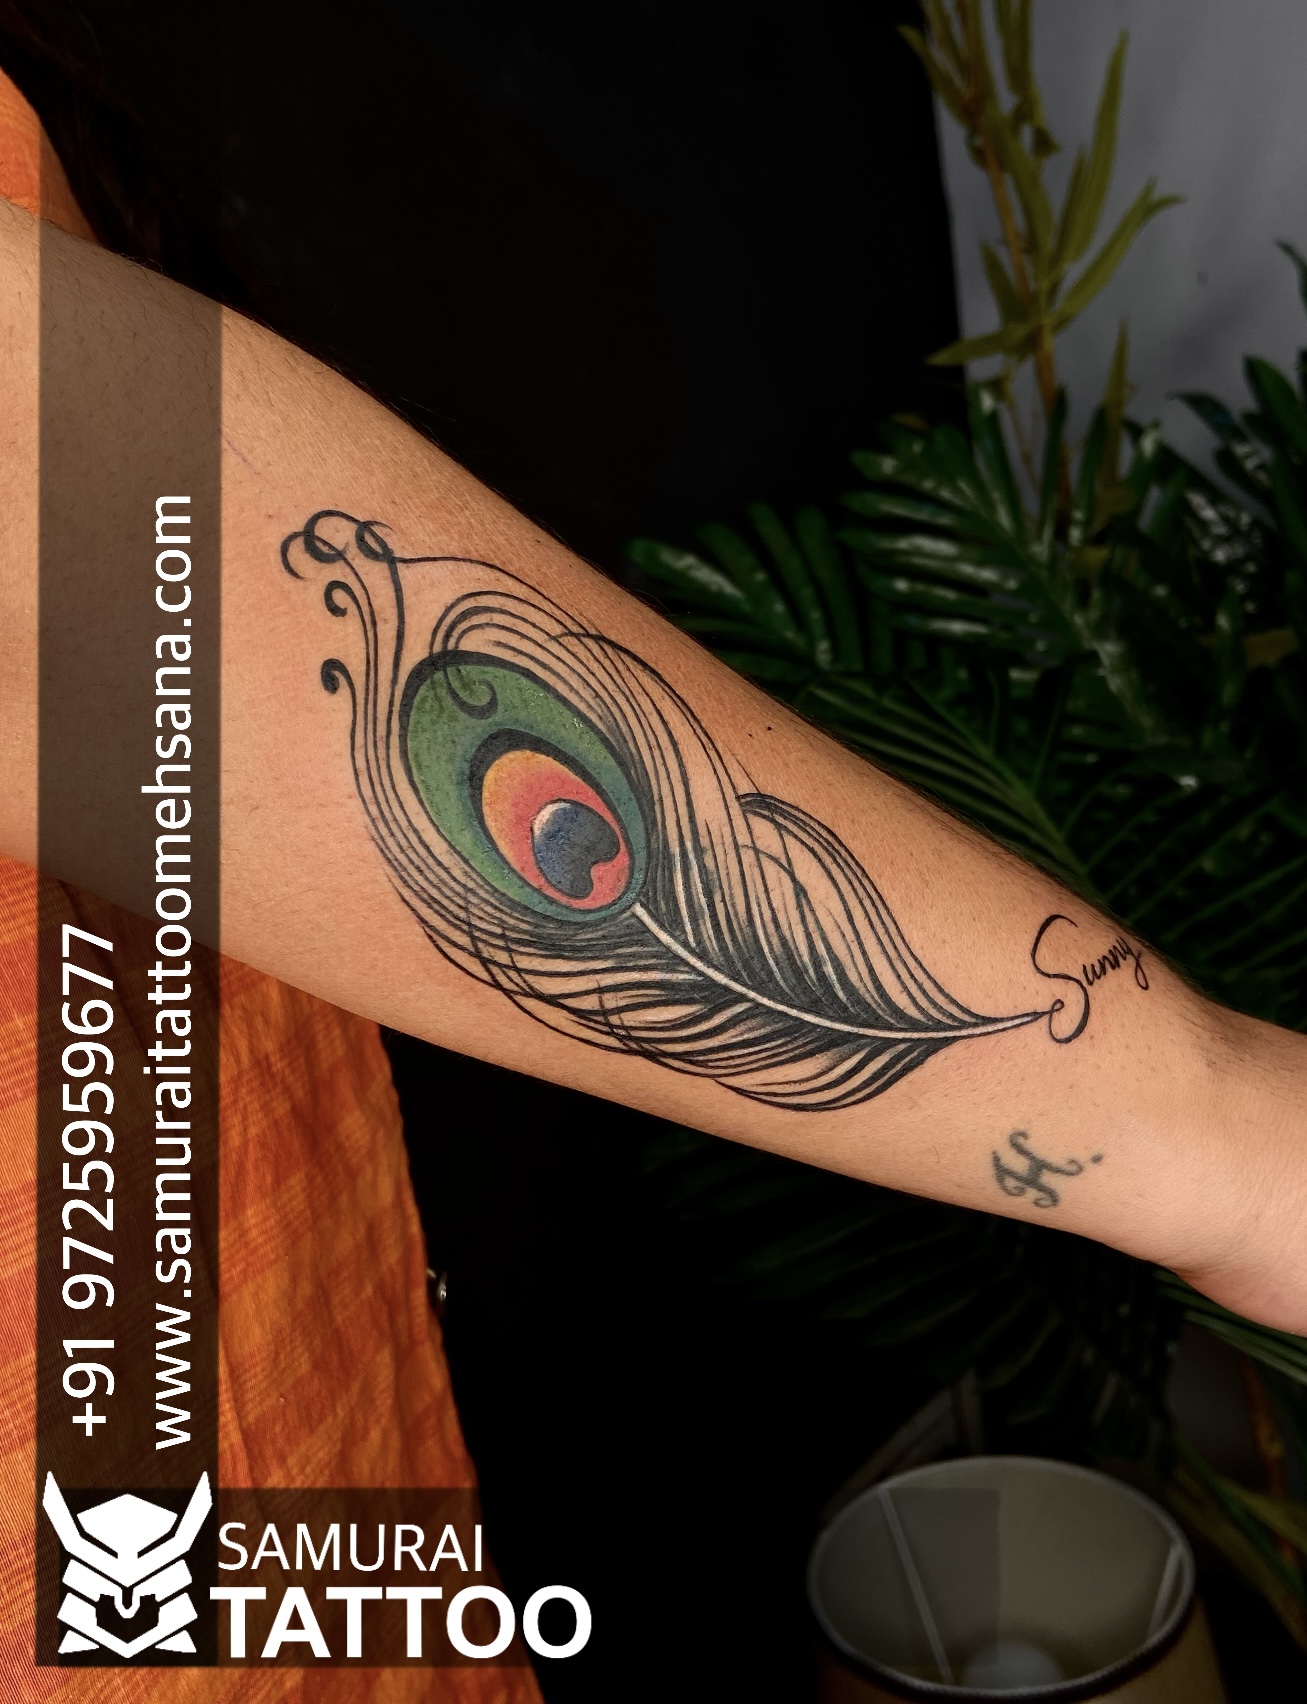 my tattoo Images • ji g's (@73930784) on ShareChat